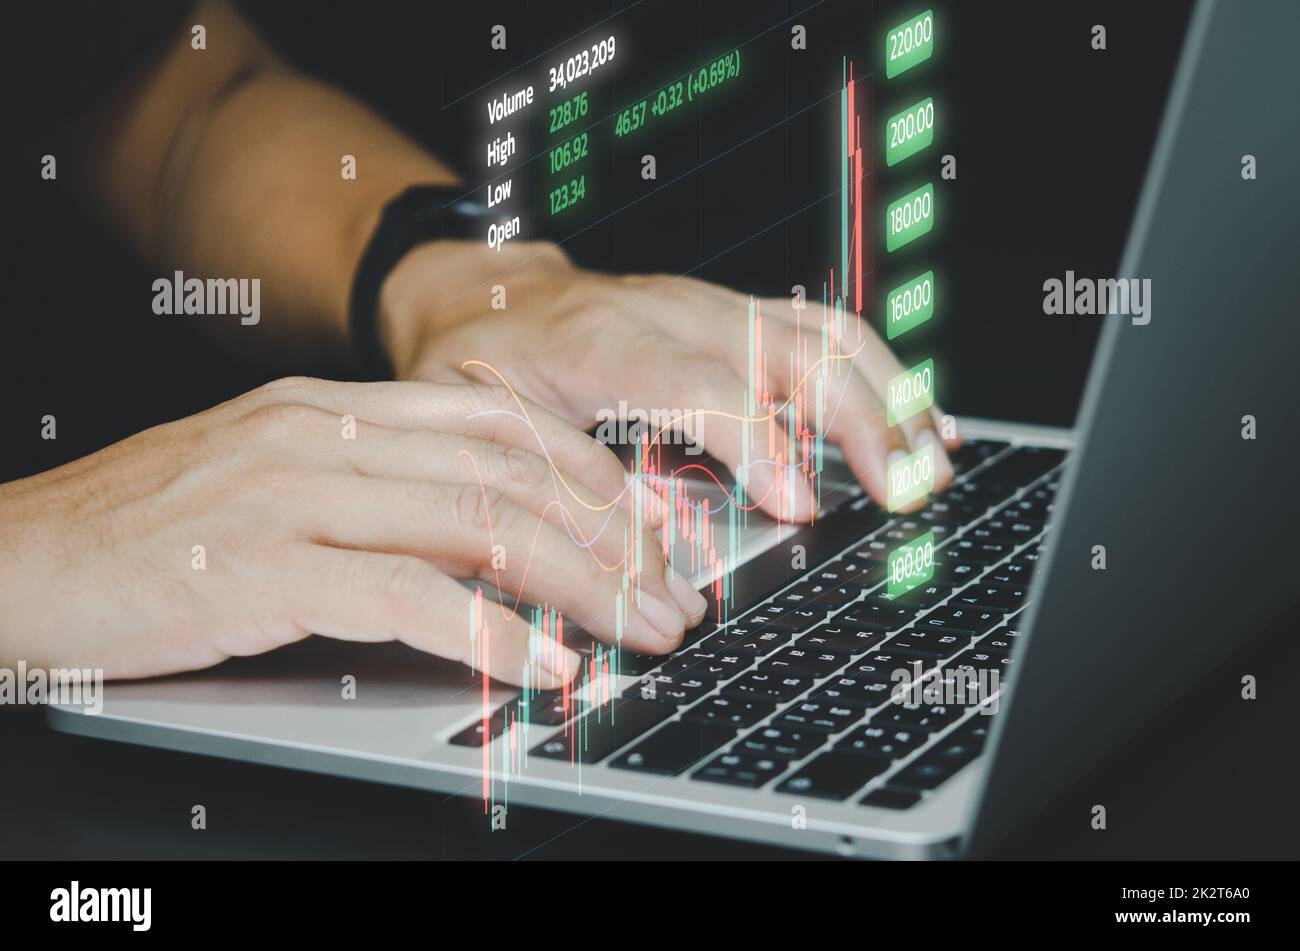 Man hands using computers to analyze data and investment charts. Financial trading plans and digital banking technology marketing. Stock Photo